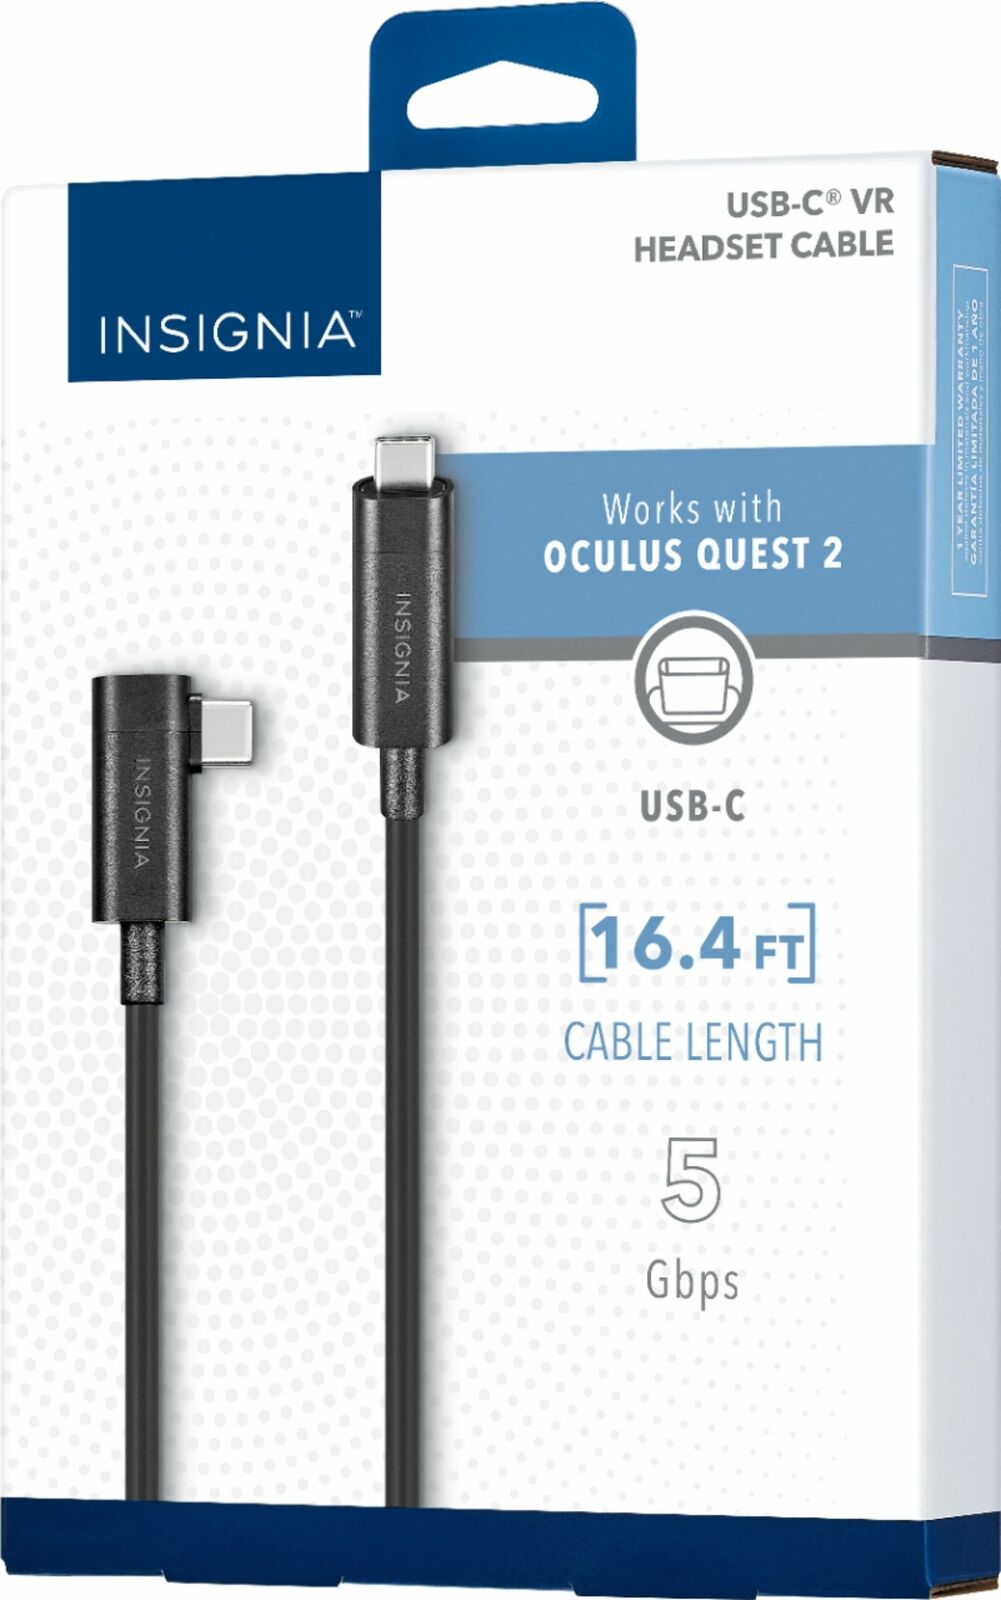 Oculus Link Virtual Reality Headset Cable for Quest and Quest 2 - Rekes Sales